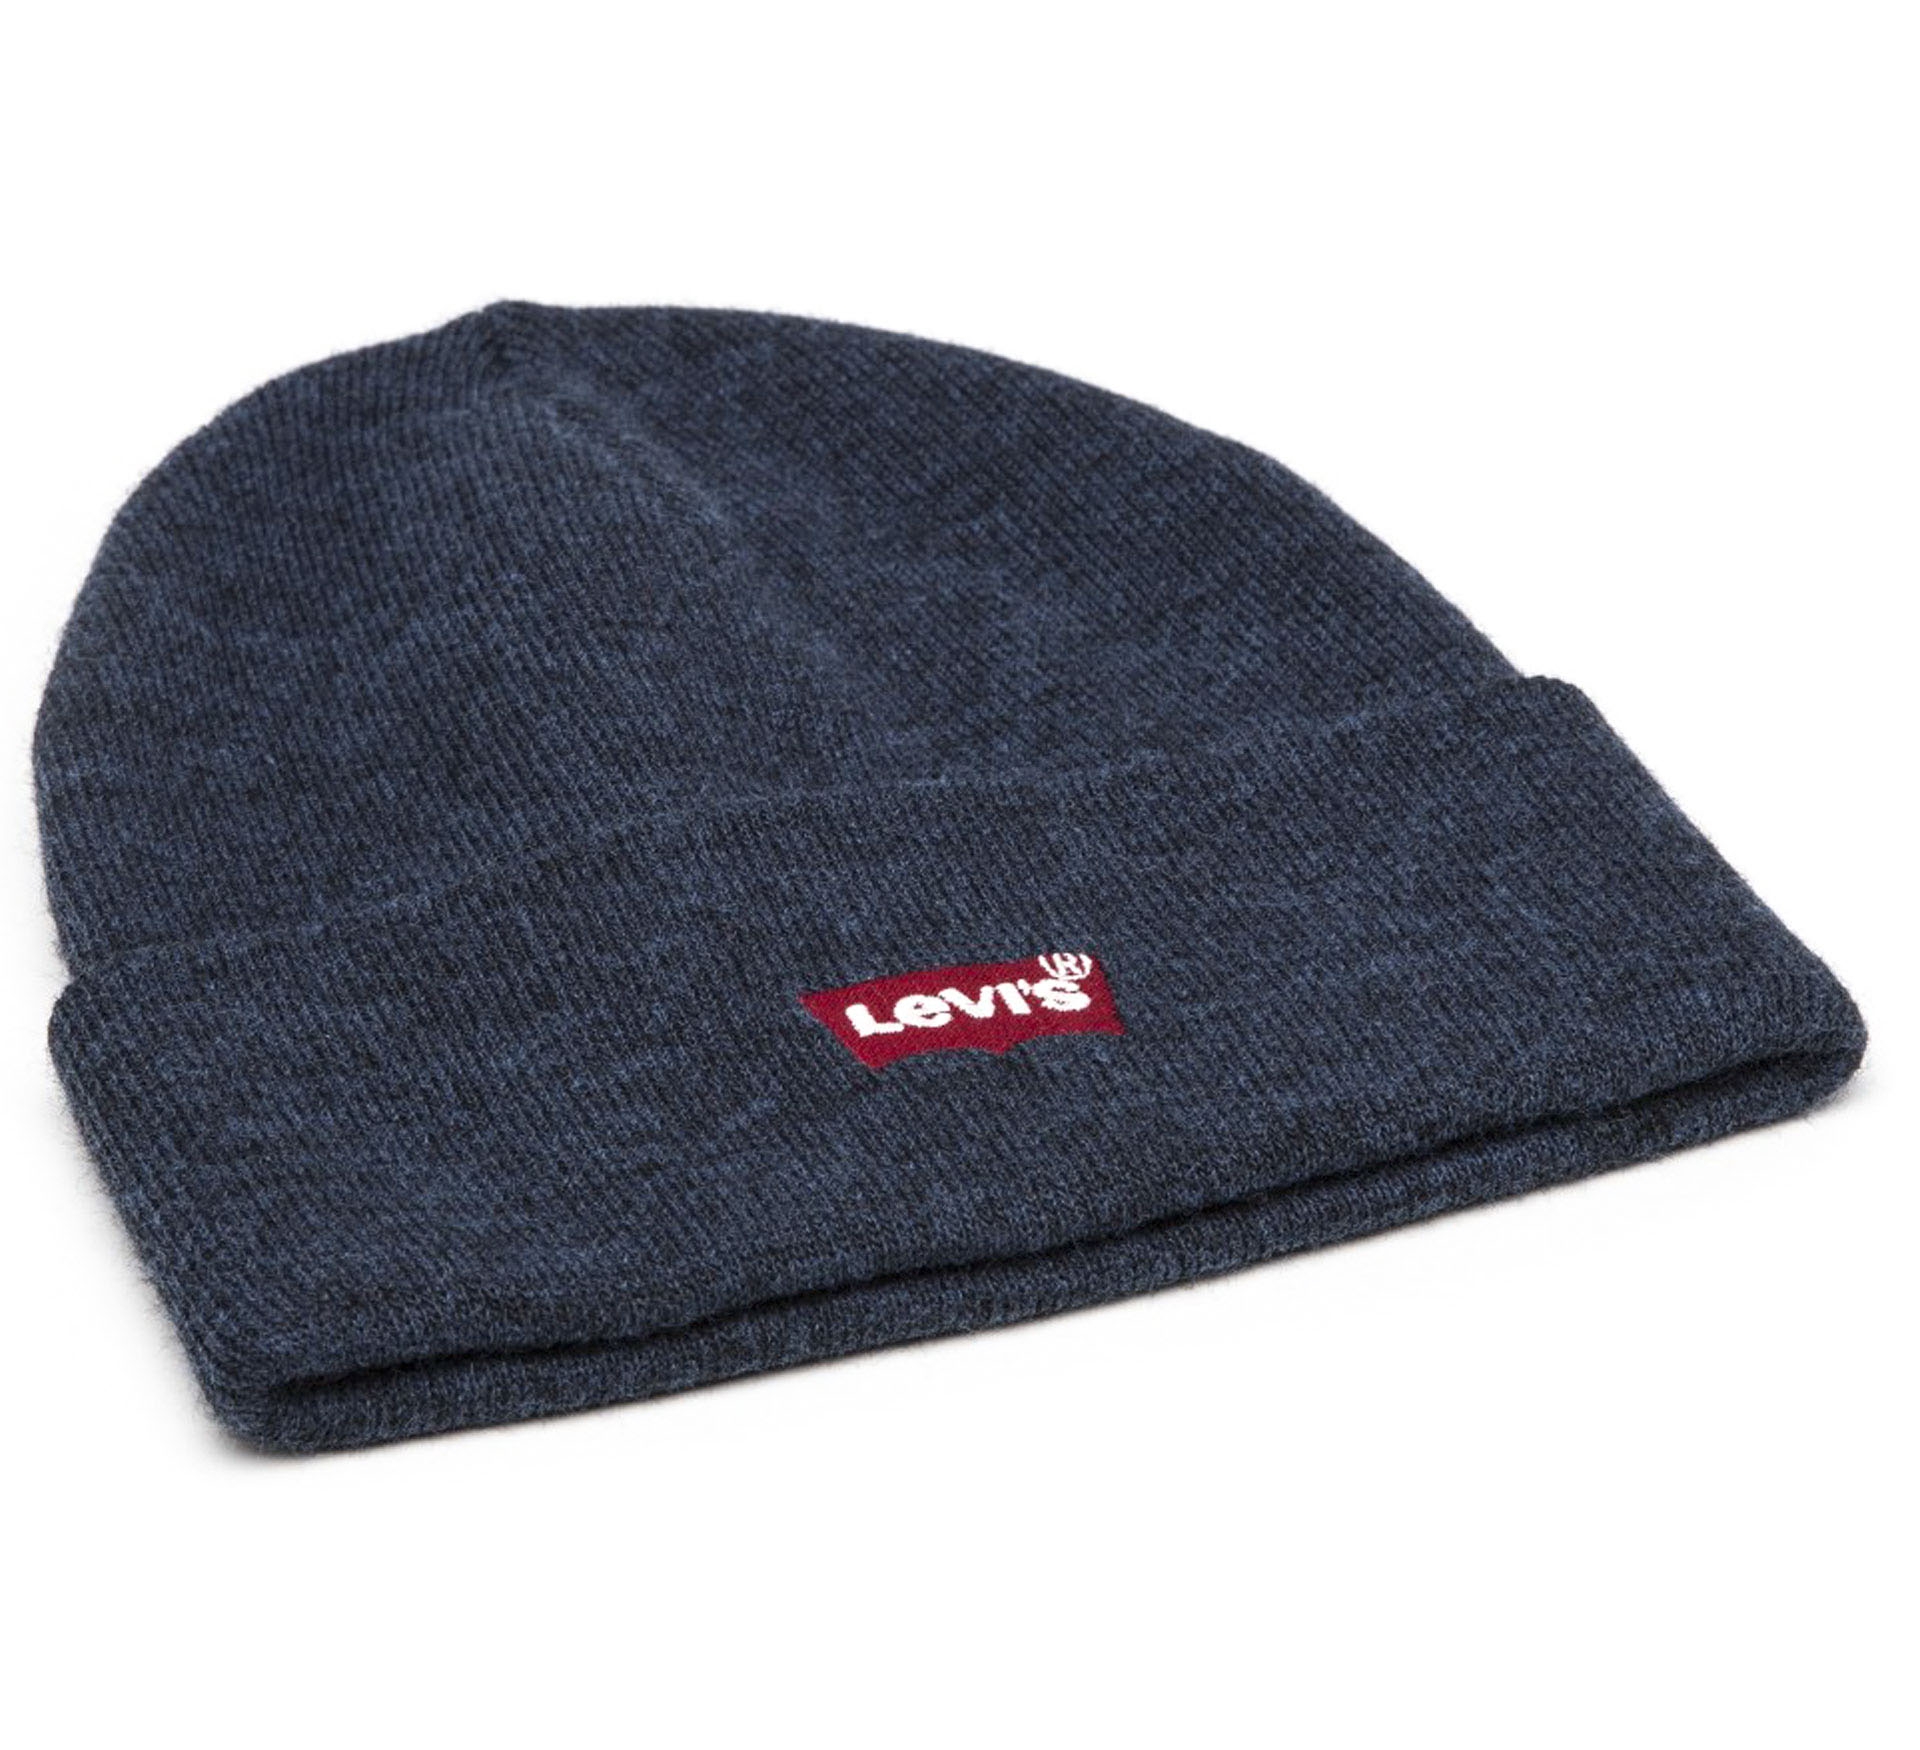 Bonnet Levi's Red Batwing Embroidered